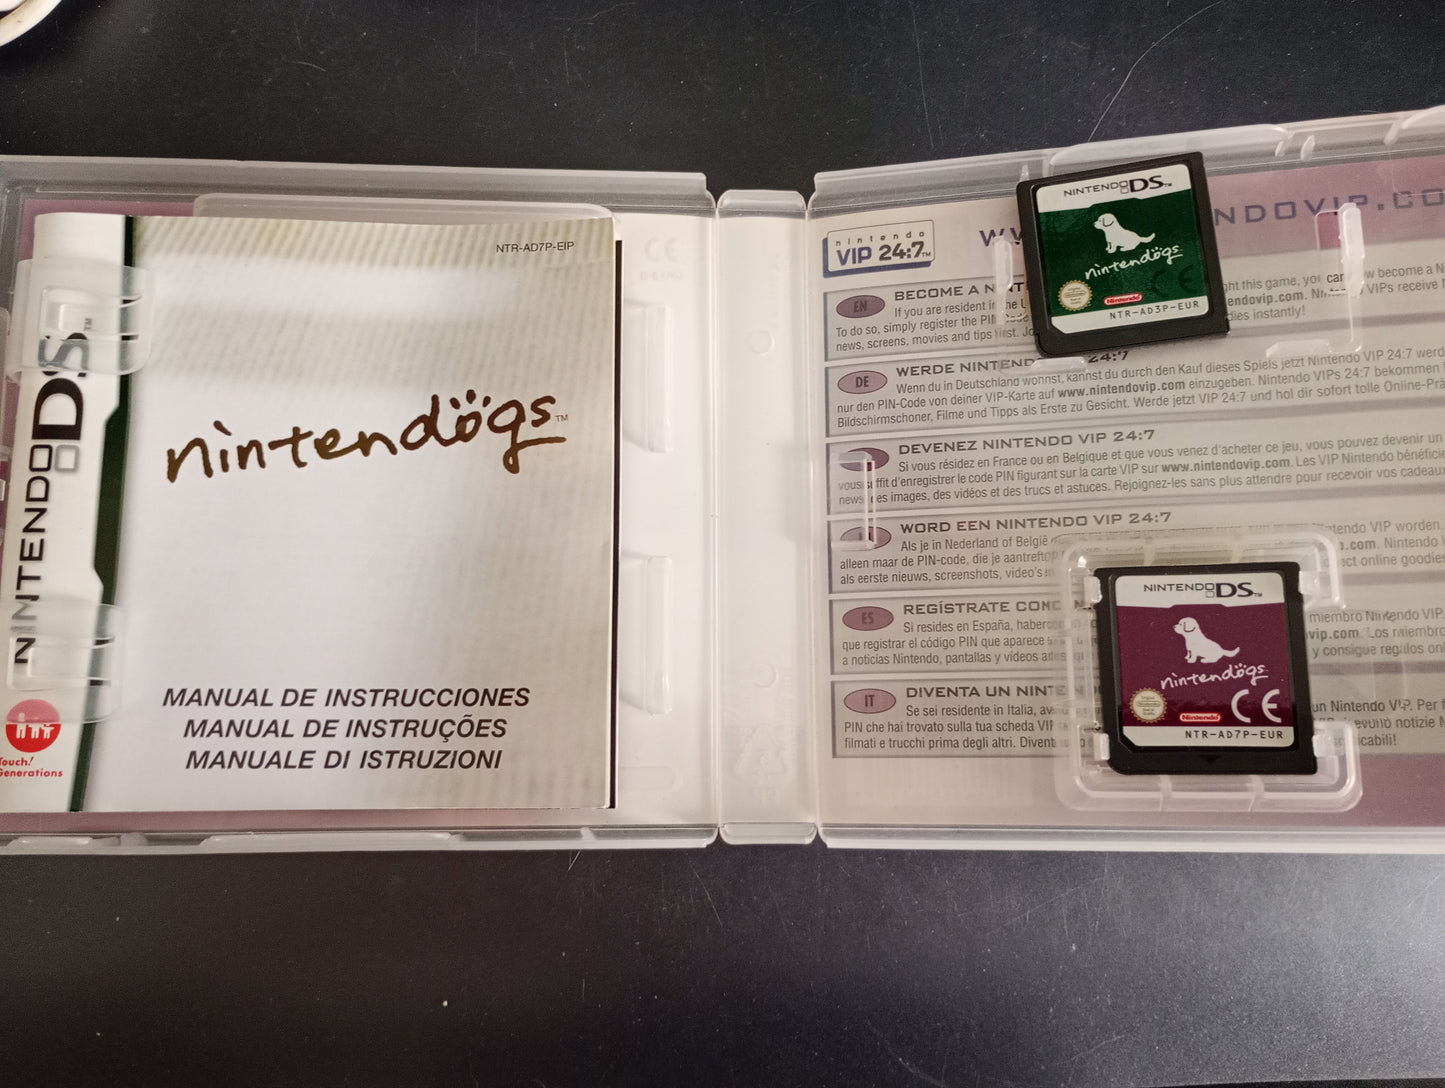 Nintendogs: Dalmatians &amp; Friends and Lab &amp; Friends (card only)